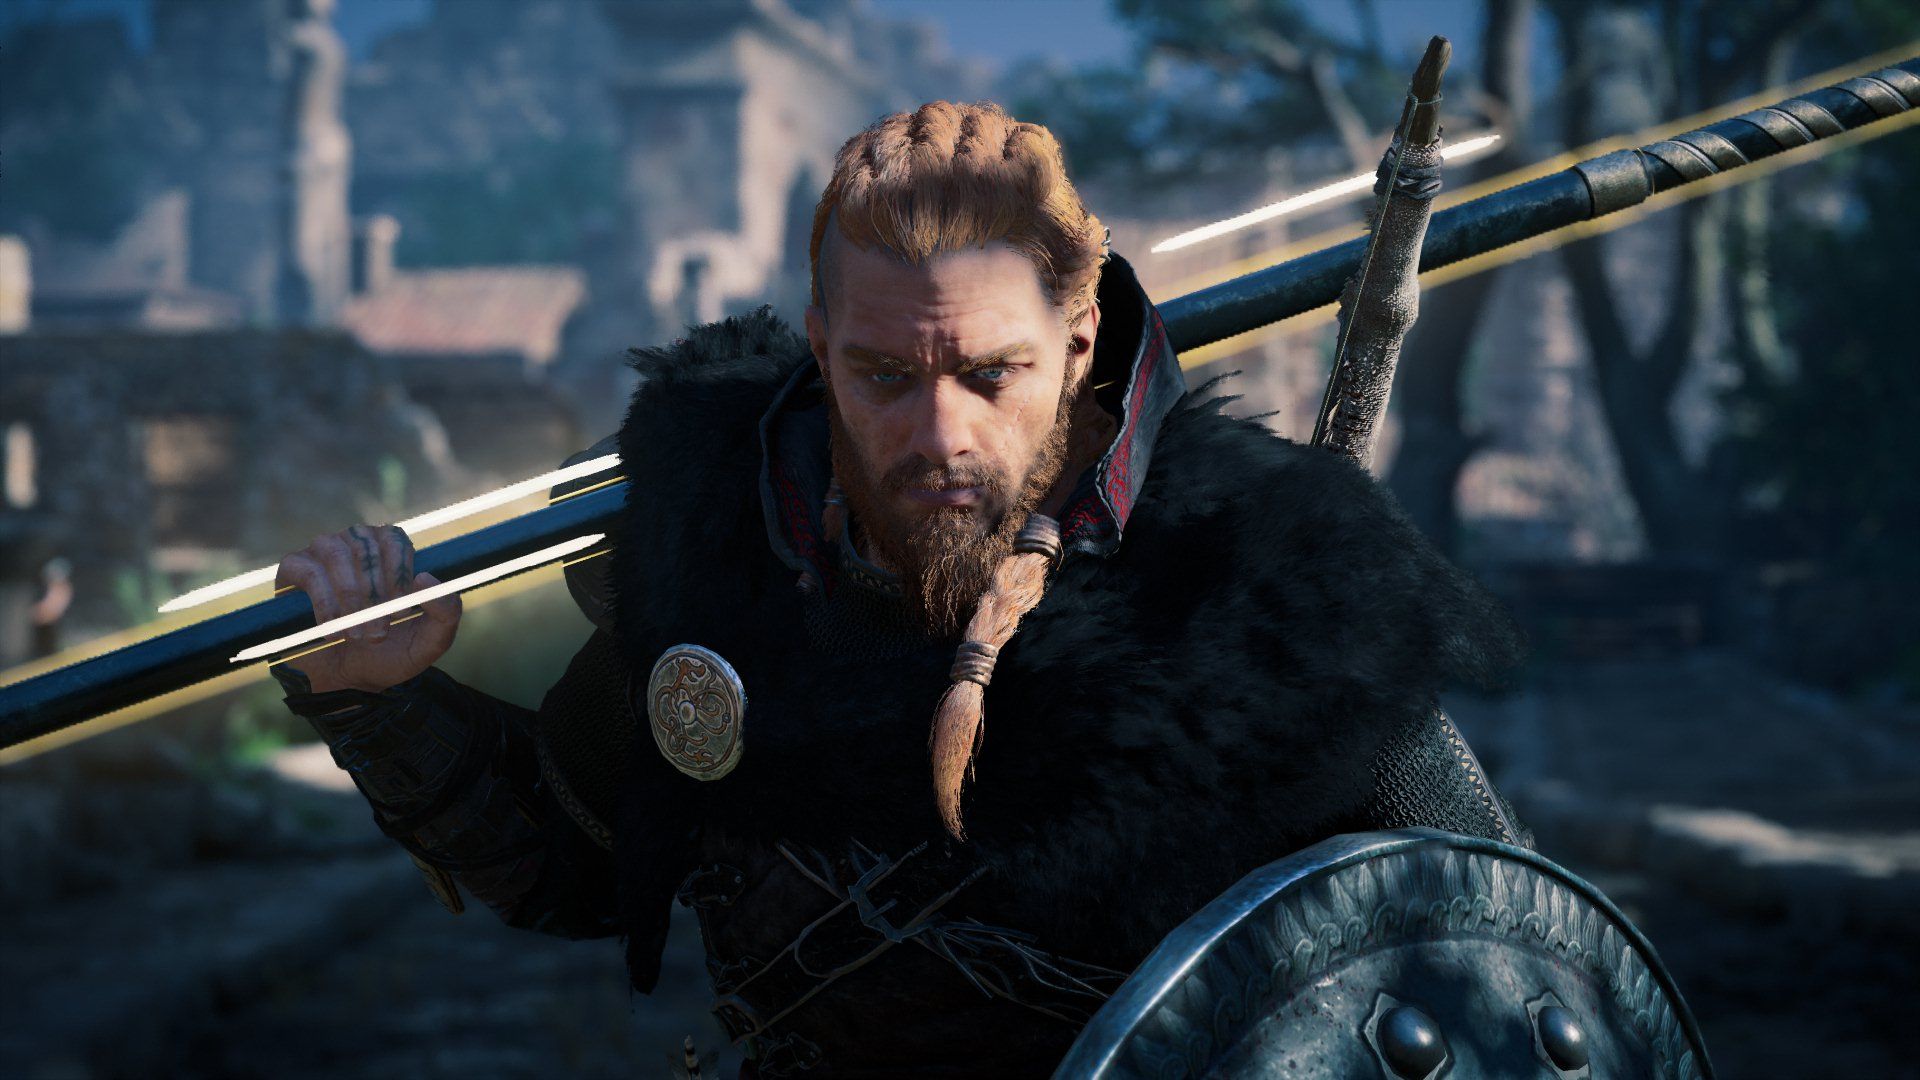 Assassin's Creed Valhalla' revealed as a 9th century Viking